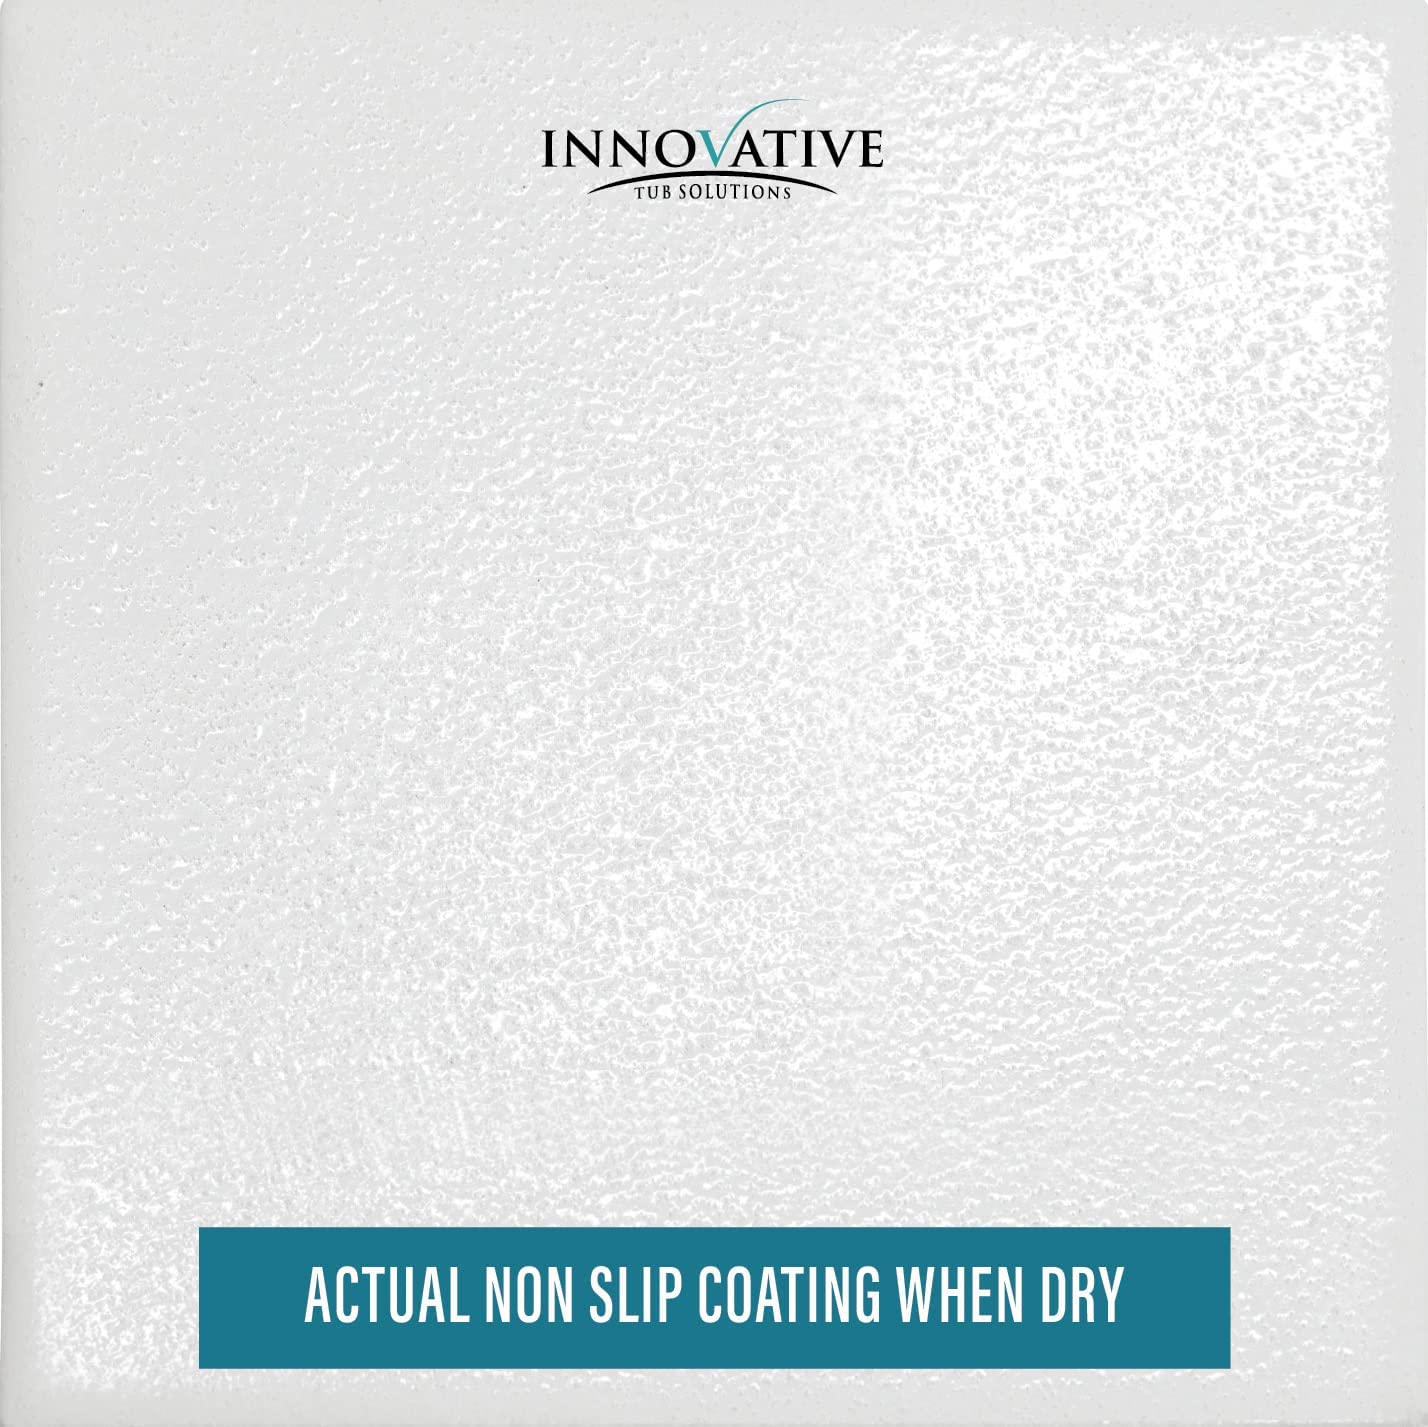 https://www.innovativetubsolutions.com/wp-content/uploads/2019/06/actual-non-slip-coating-when-dry-clear.jpg